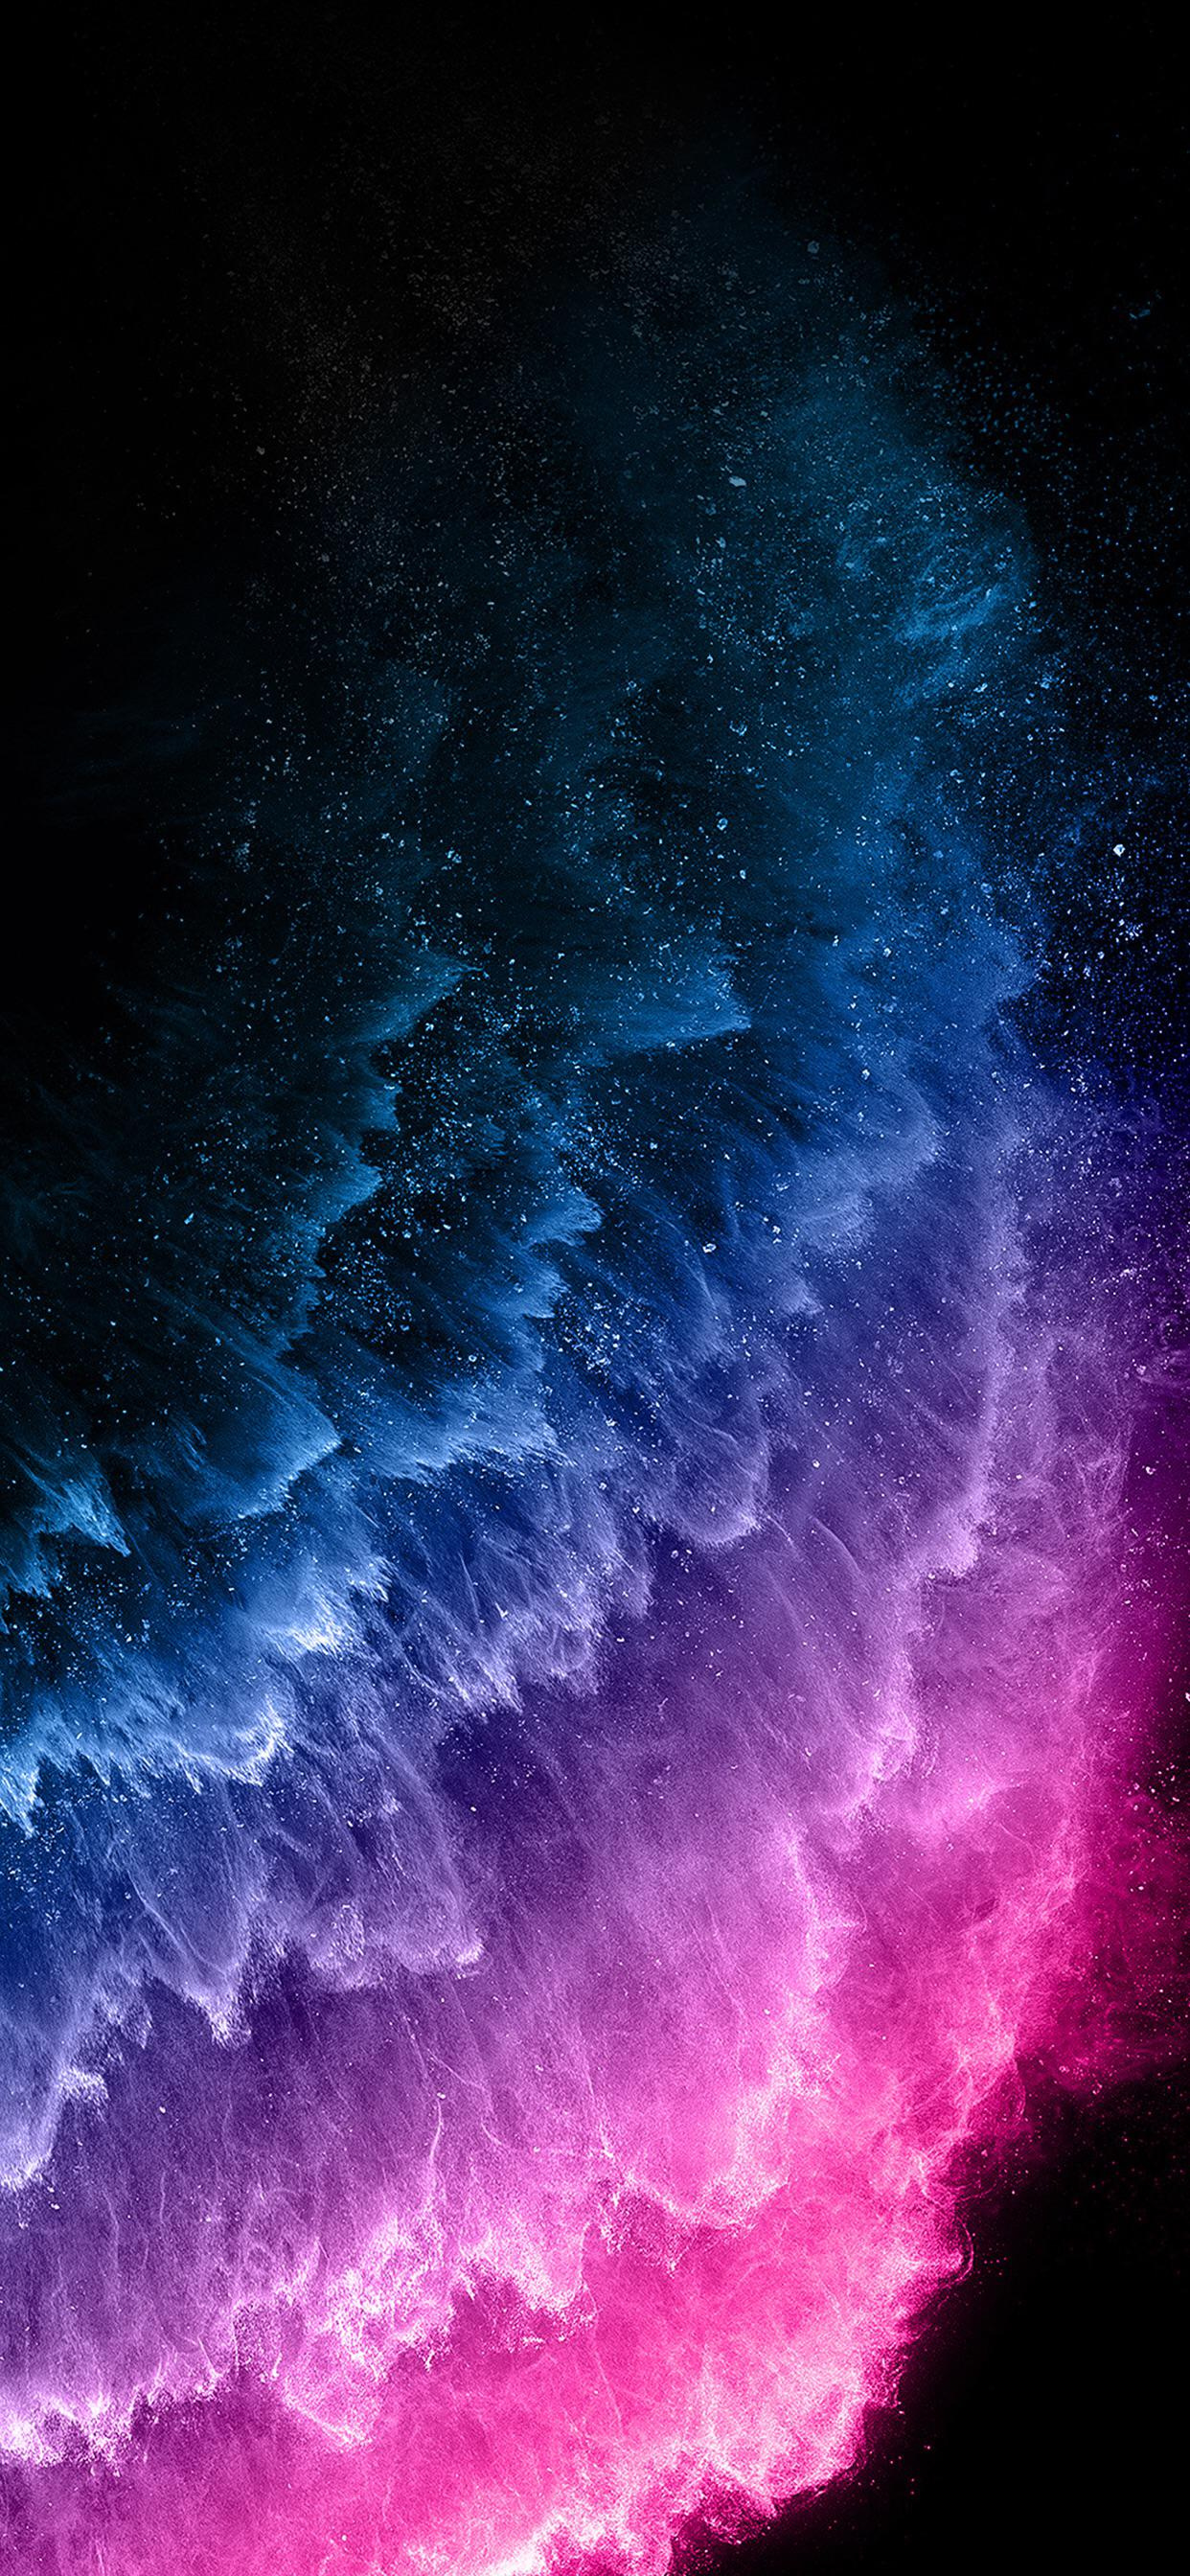 IOS 11, Apple, Android, IOS, Atmosphère. Wallpaper in 1242x2688 Resolution